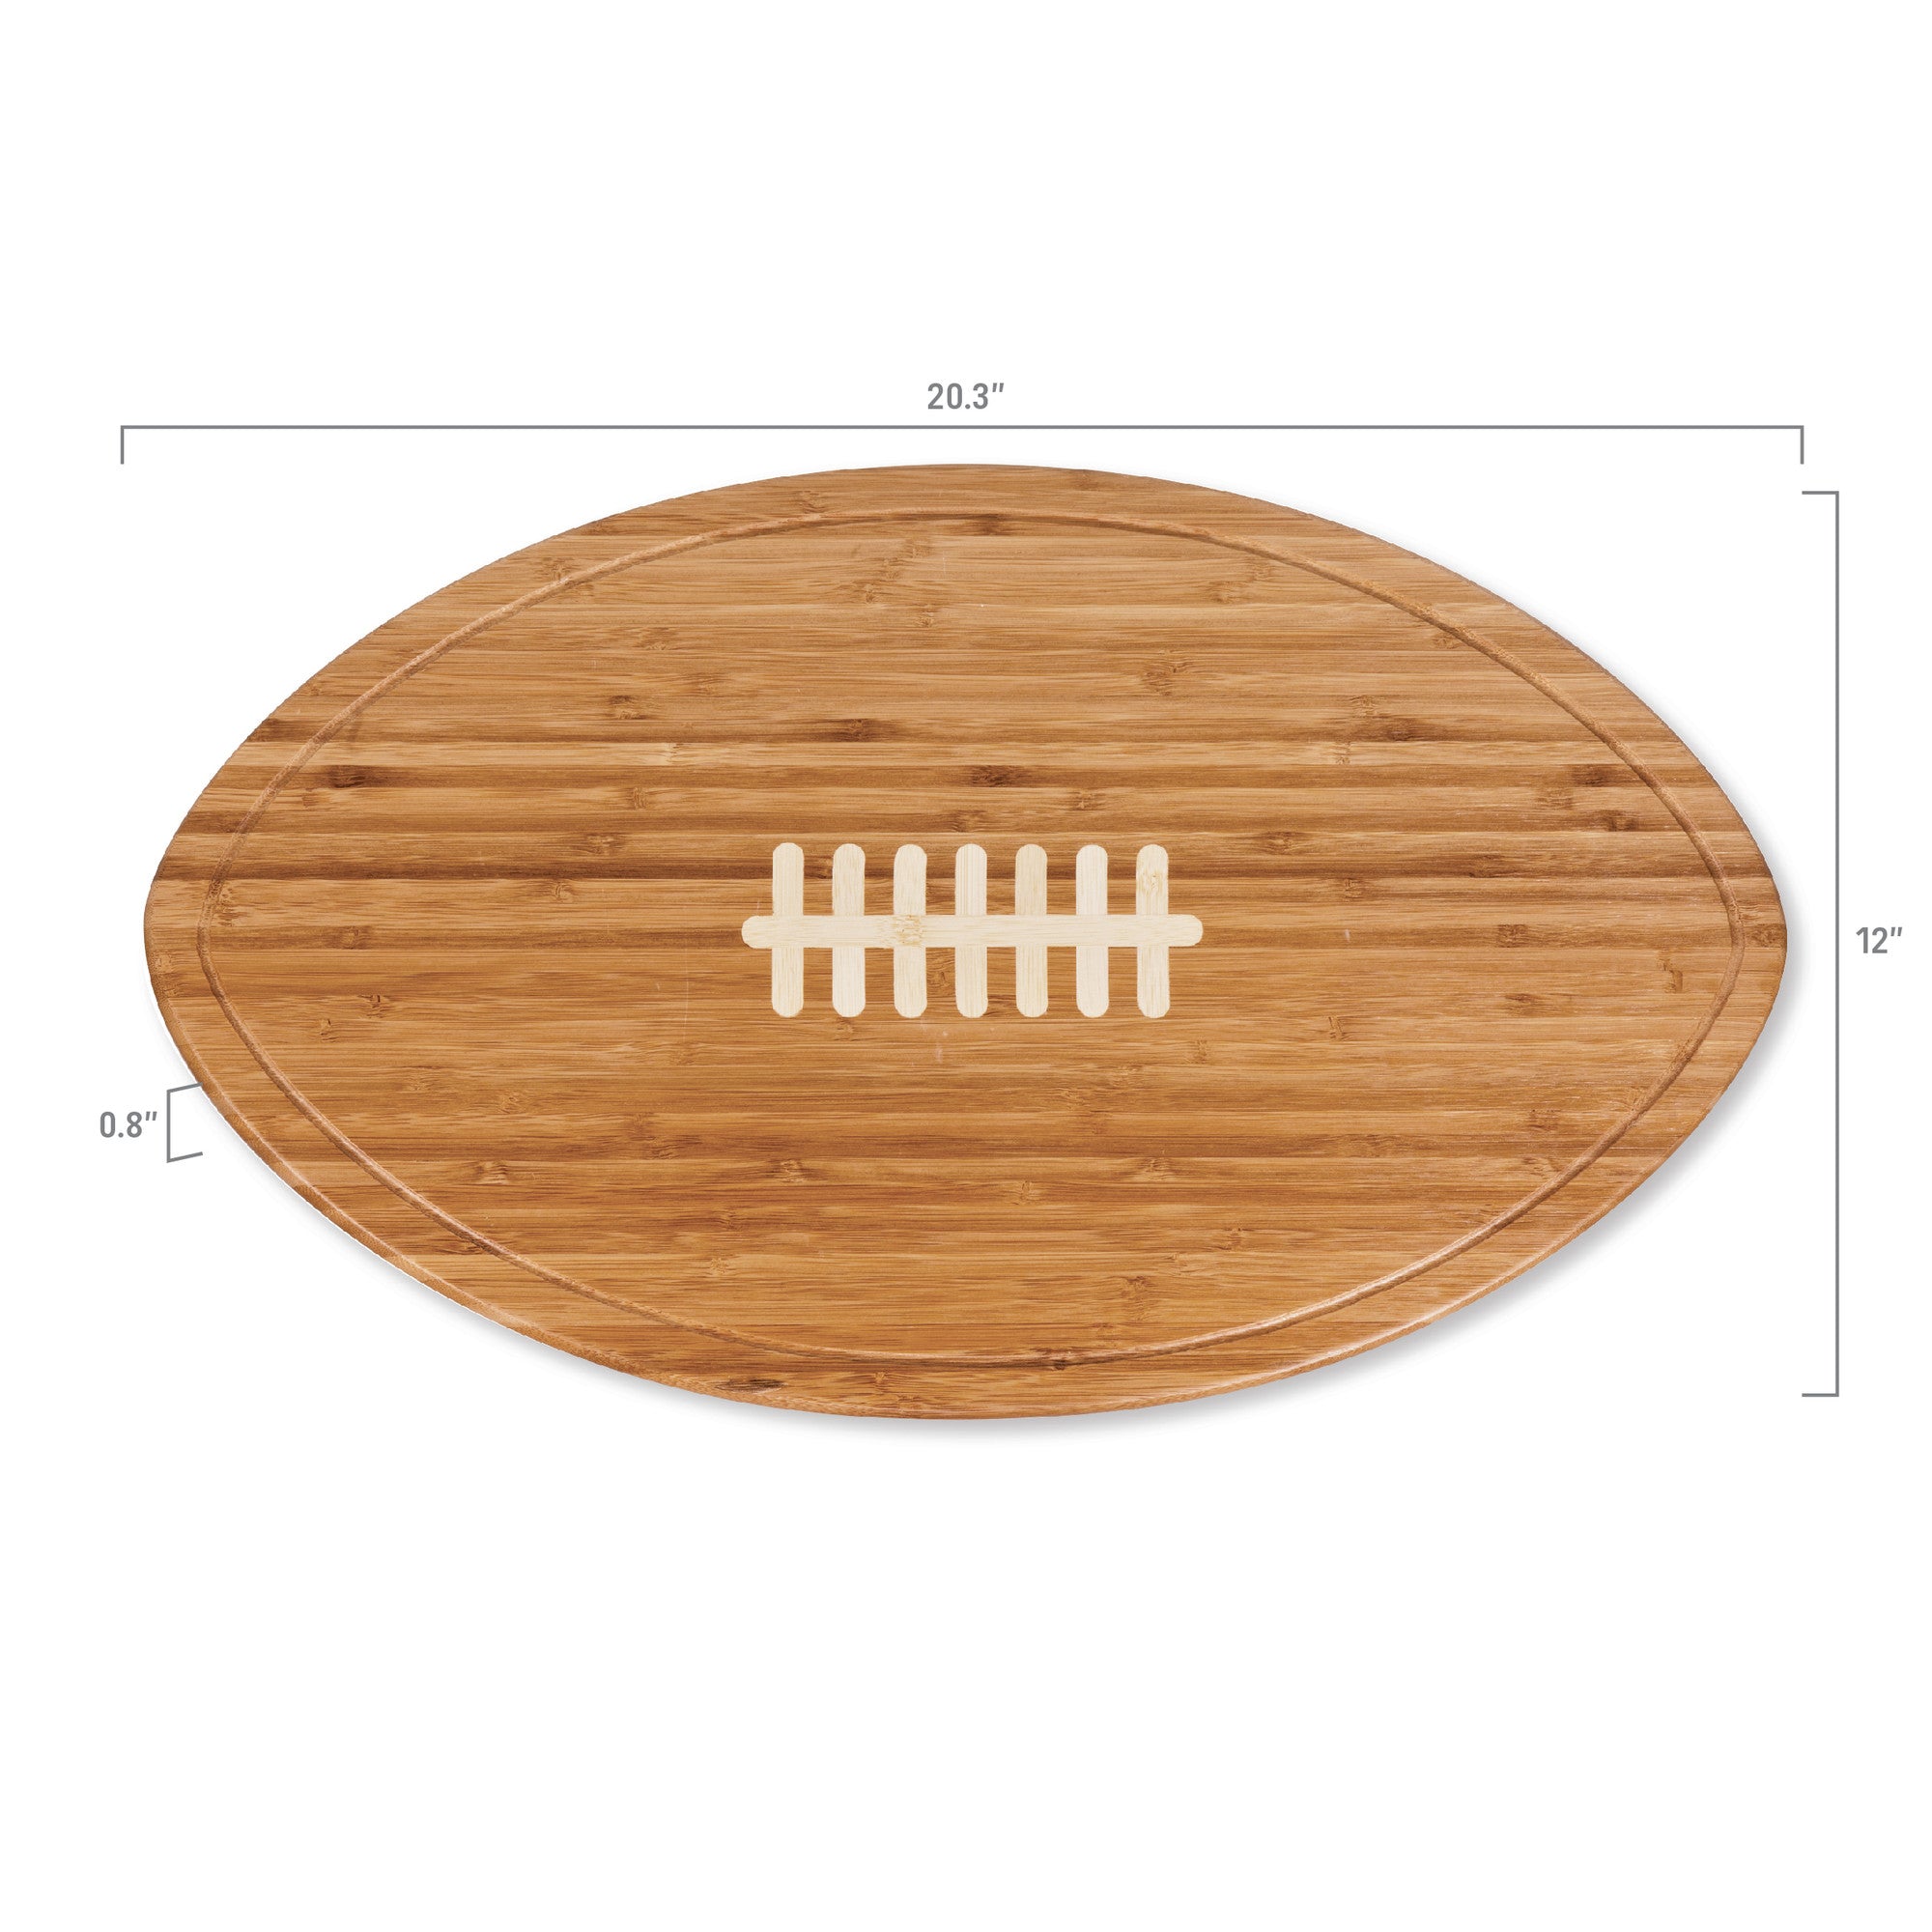 Purdue Boilermakers - Kickoff Football Cutting Board & Serving Tray